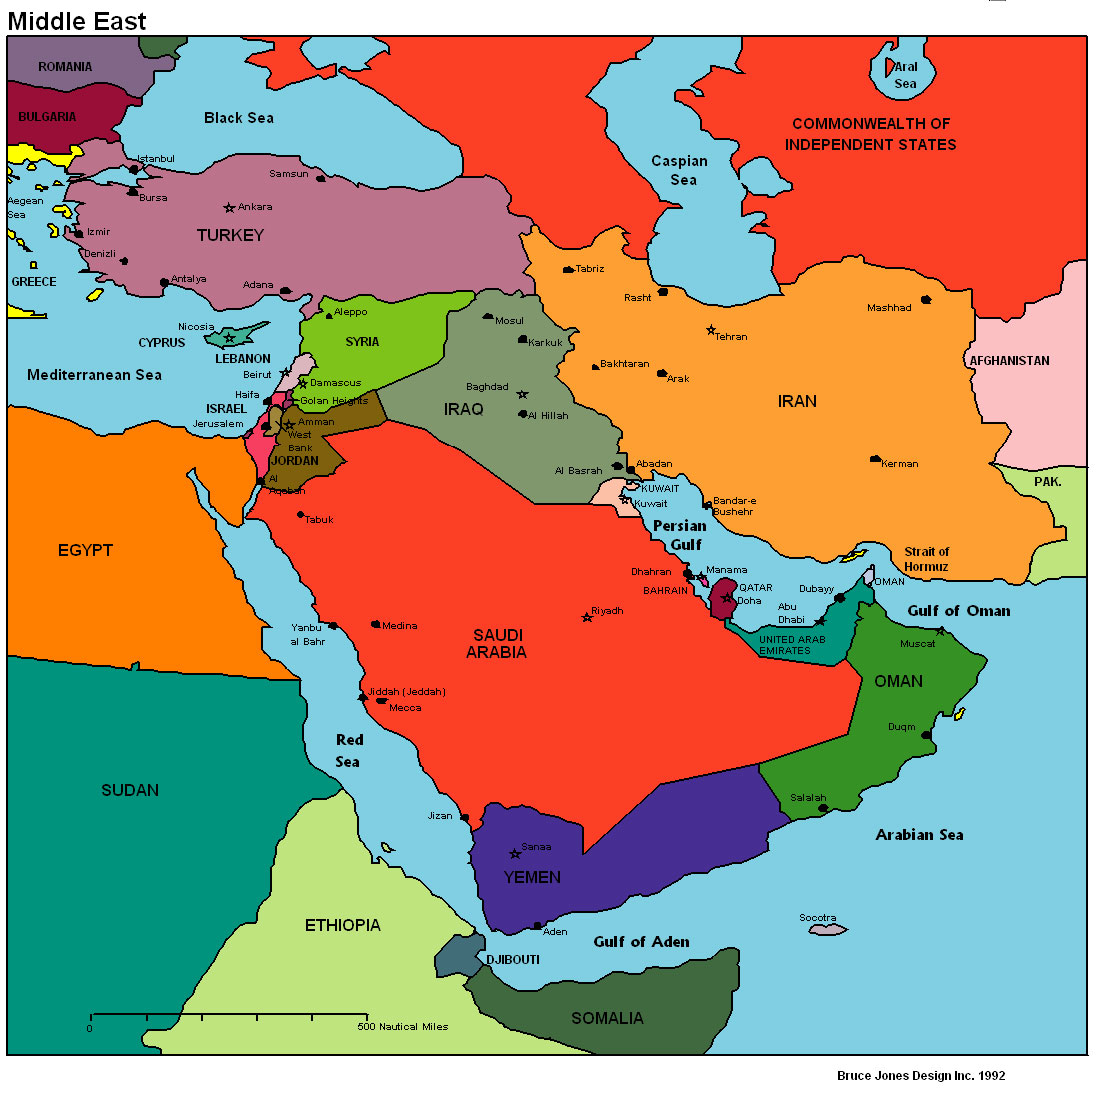 Middle East Middle East Political Map